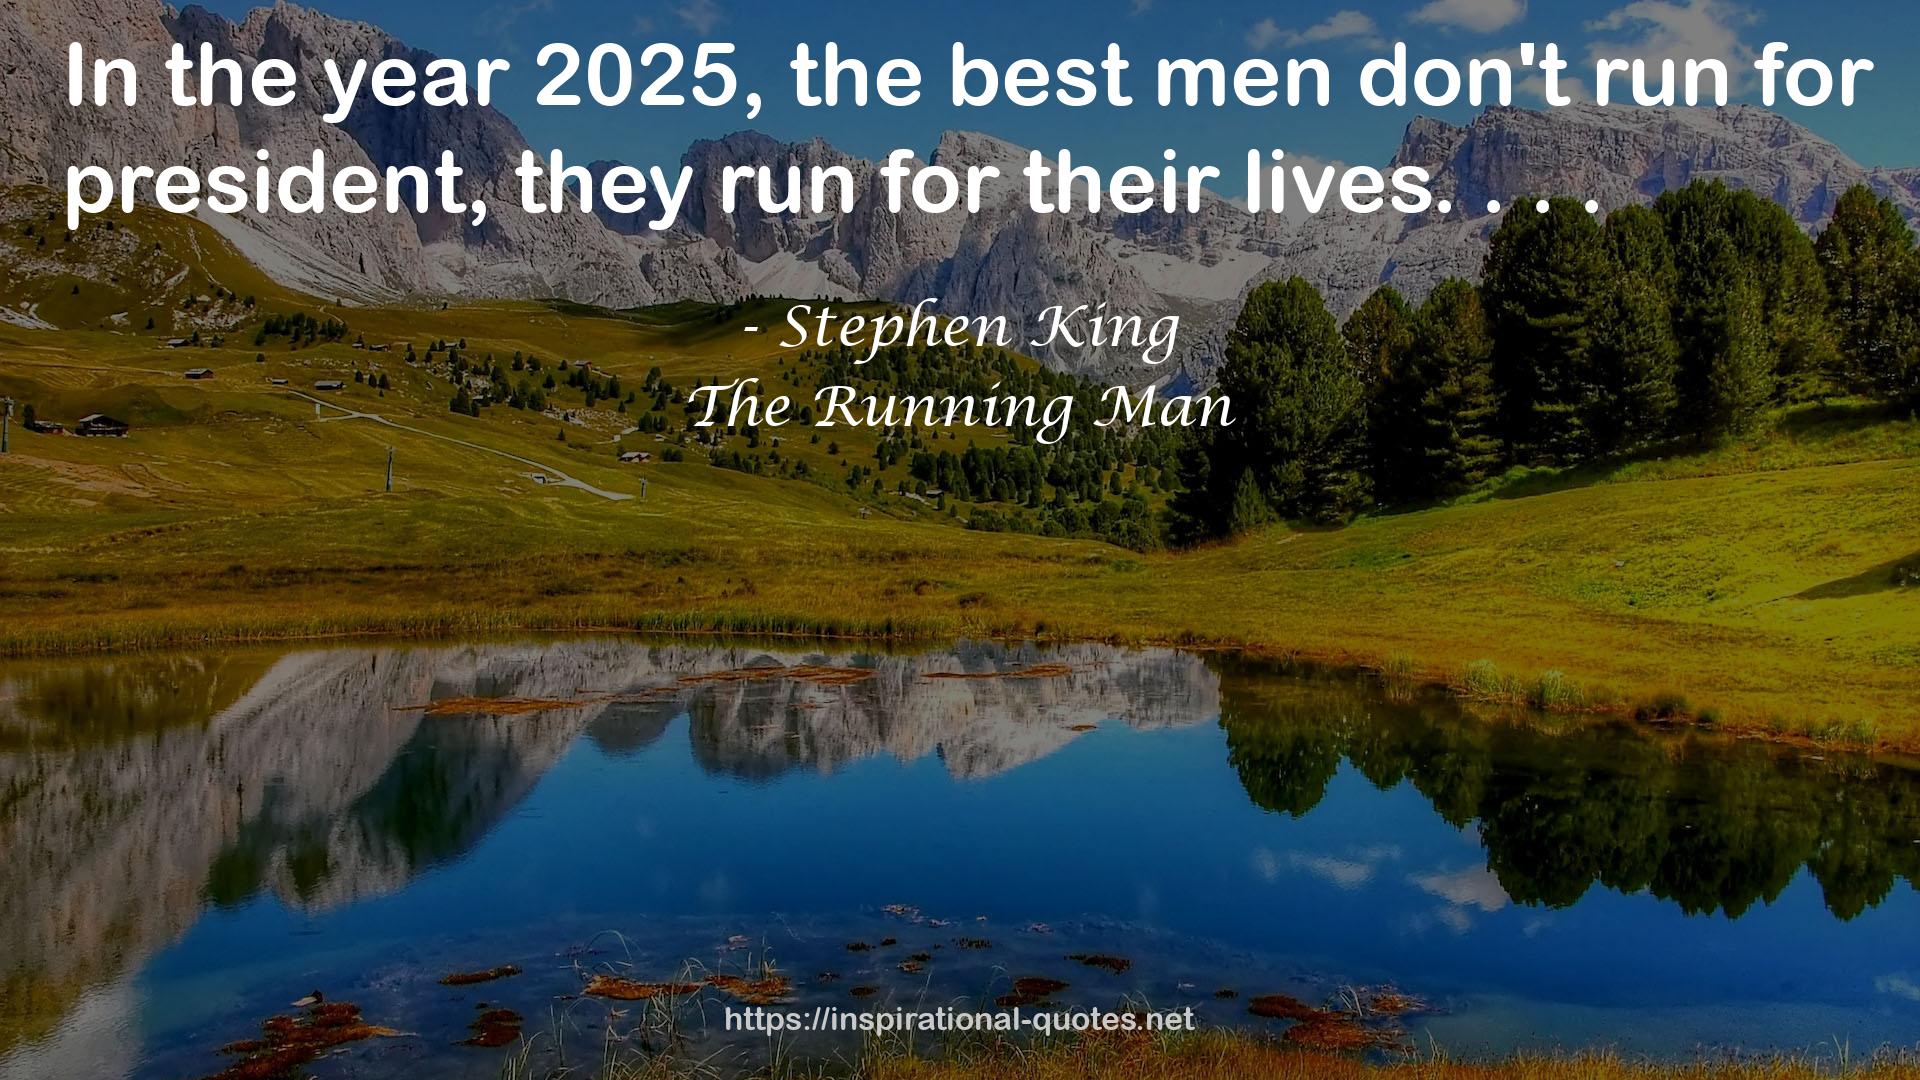 The Running Man QUOTES